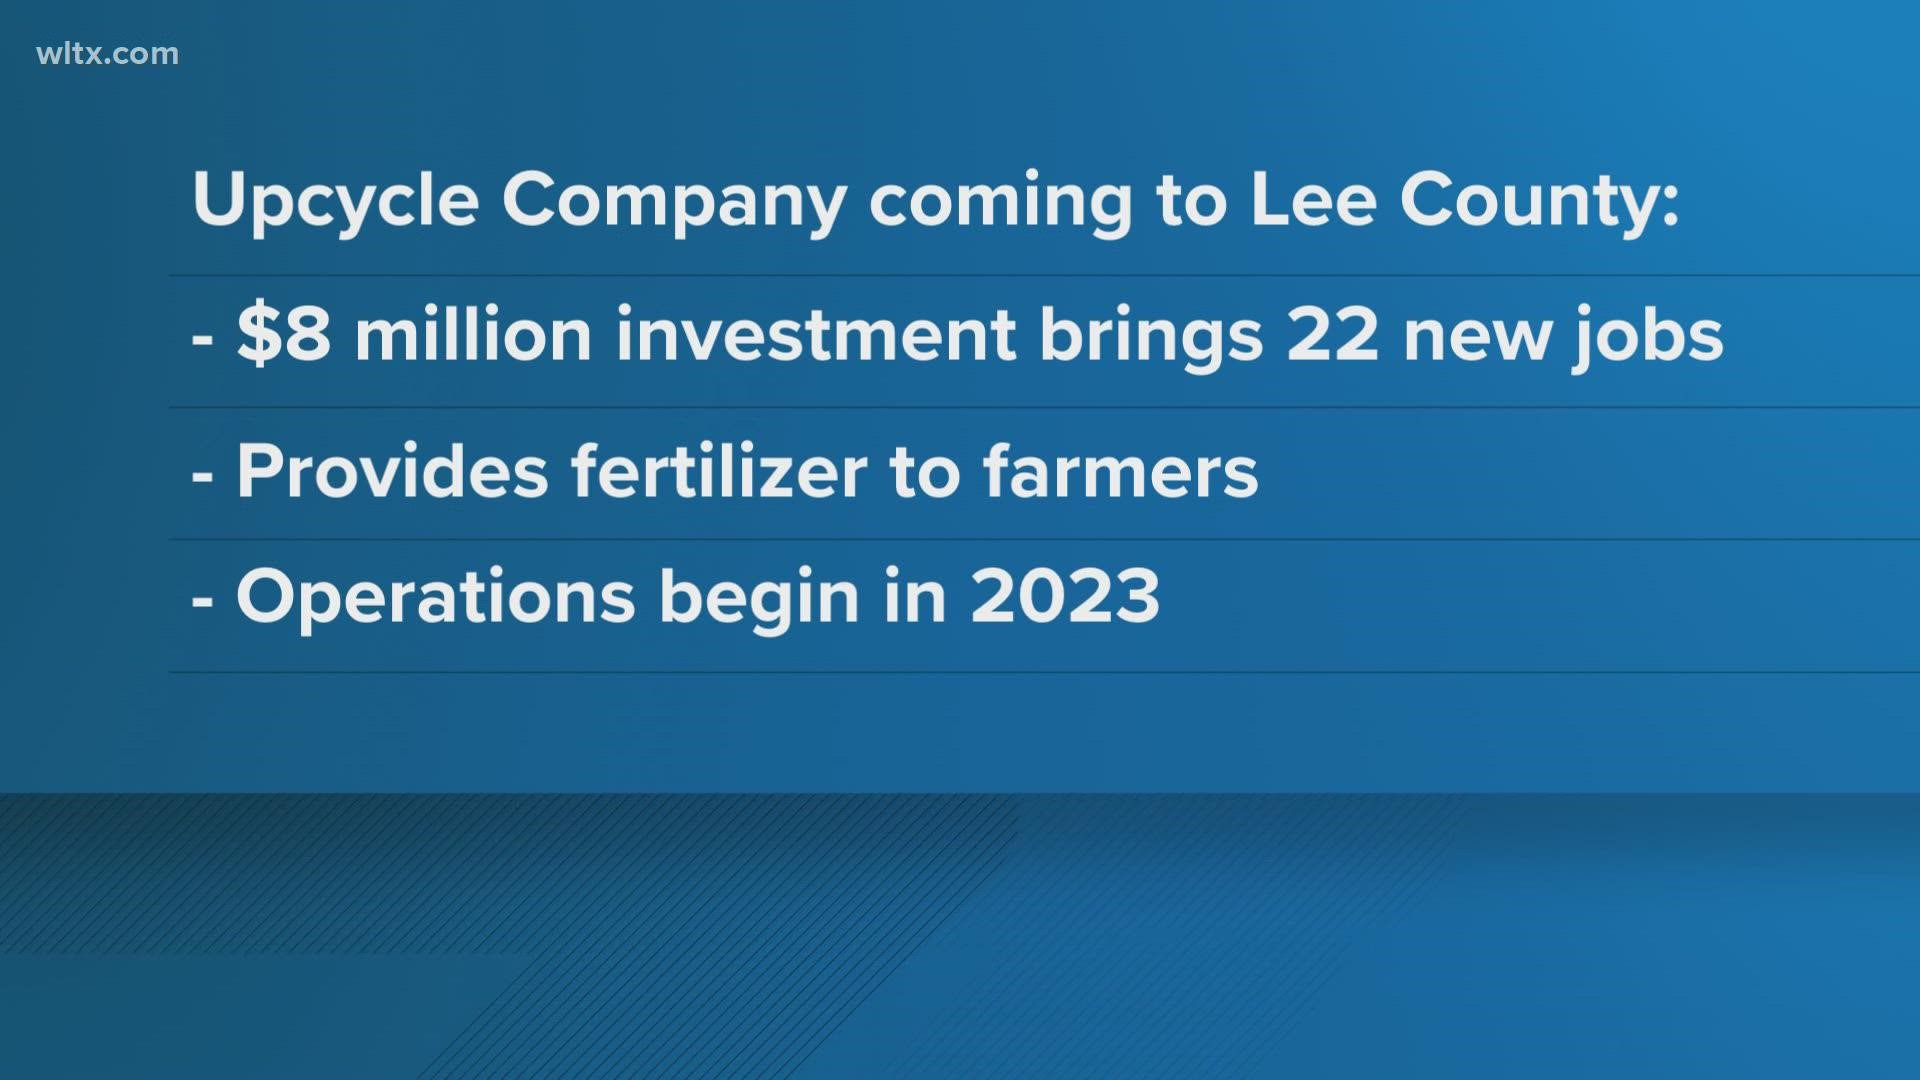 Upcycle Active Fertilizer will invest $8 million in Lee County over the next five years and will provide high quality fertilizer for use on farms.